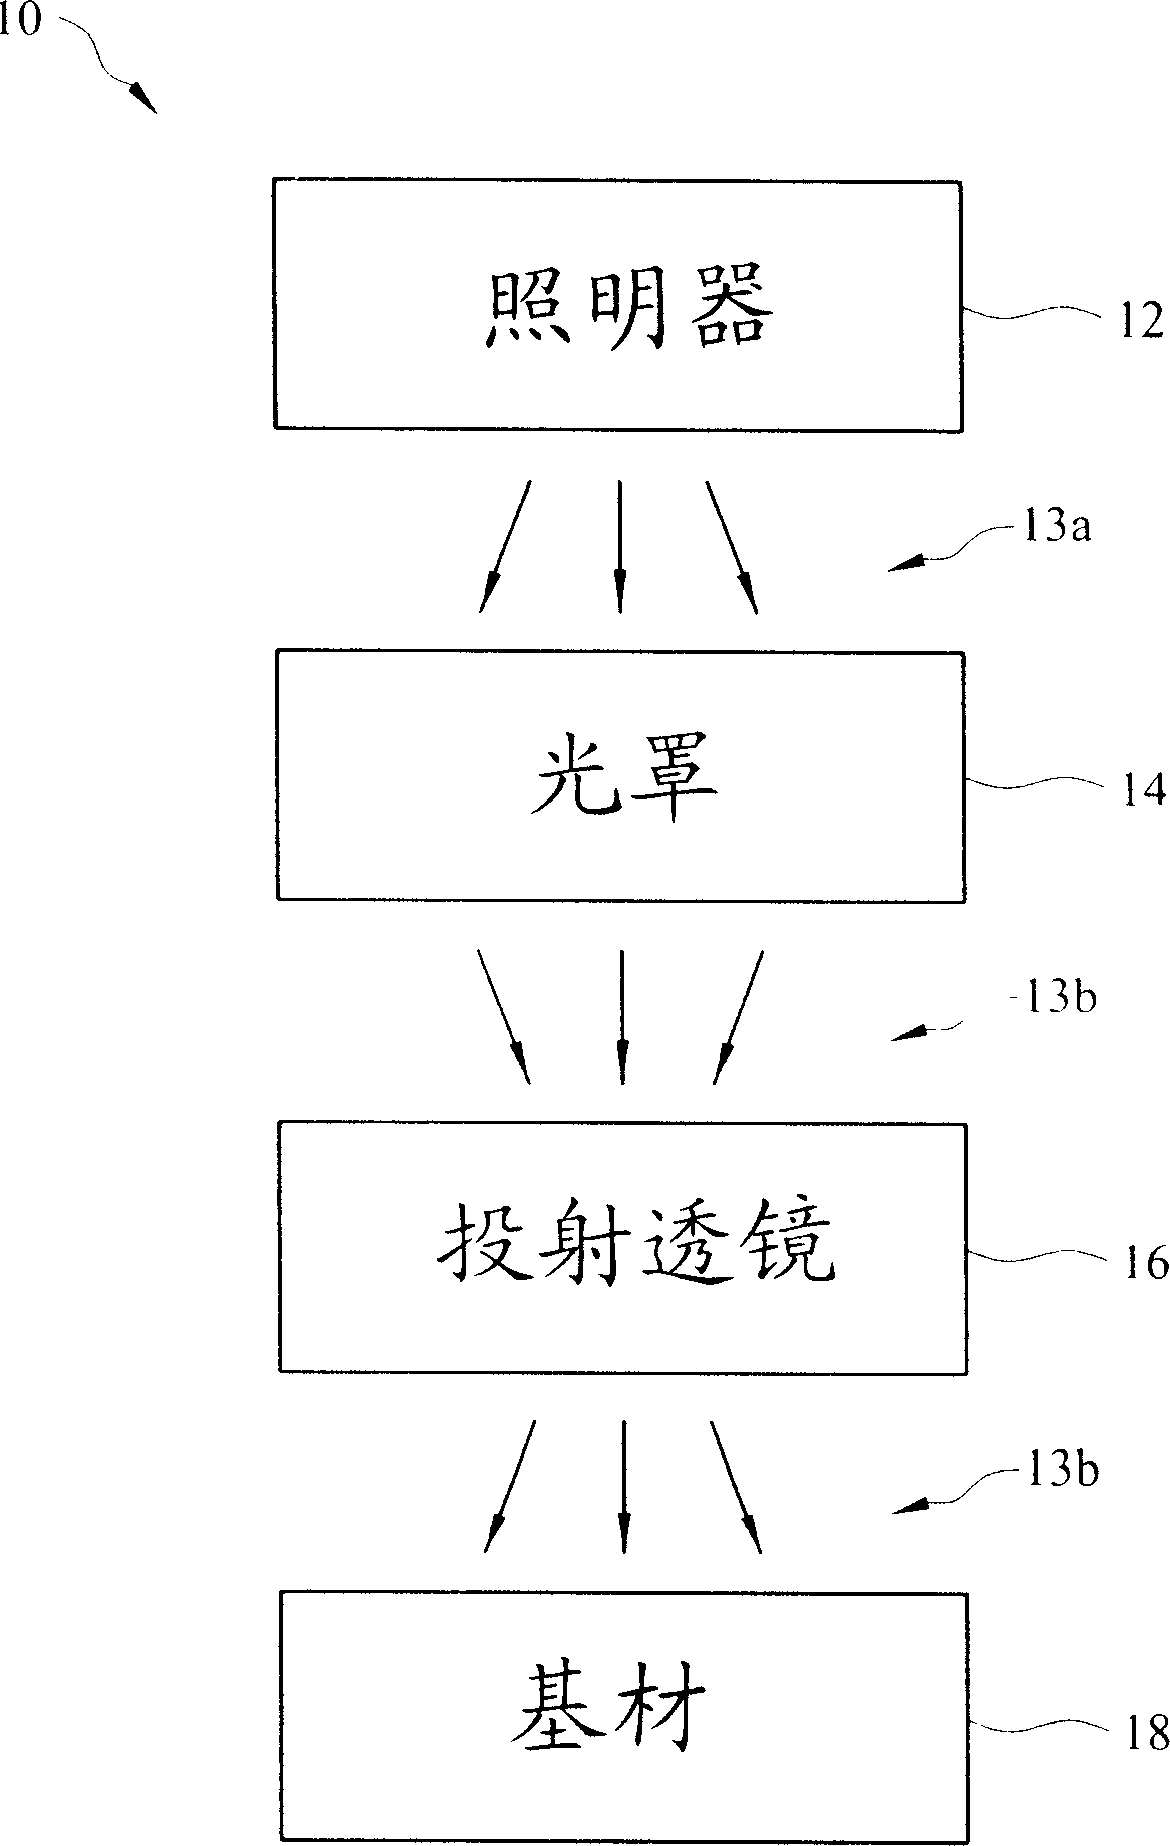 Method and system for designing optical shield layout and producing optical shield pattern